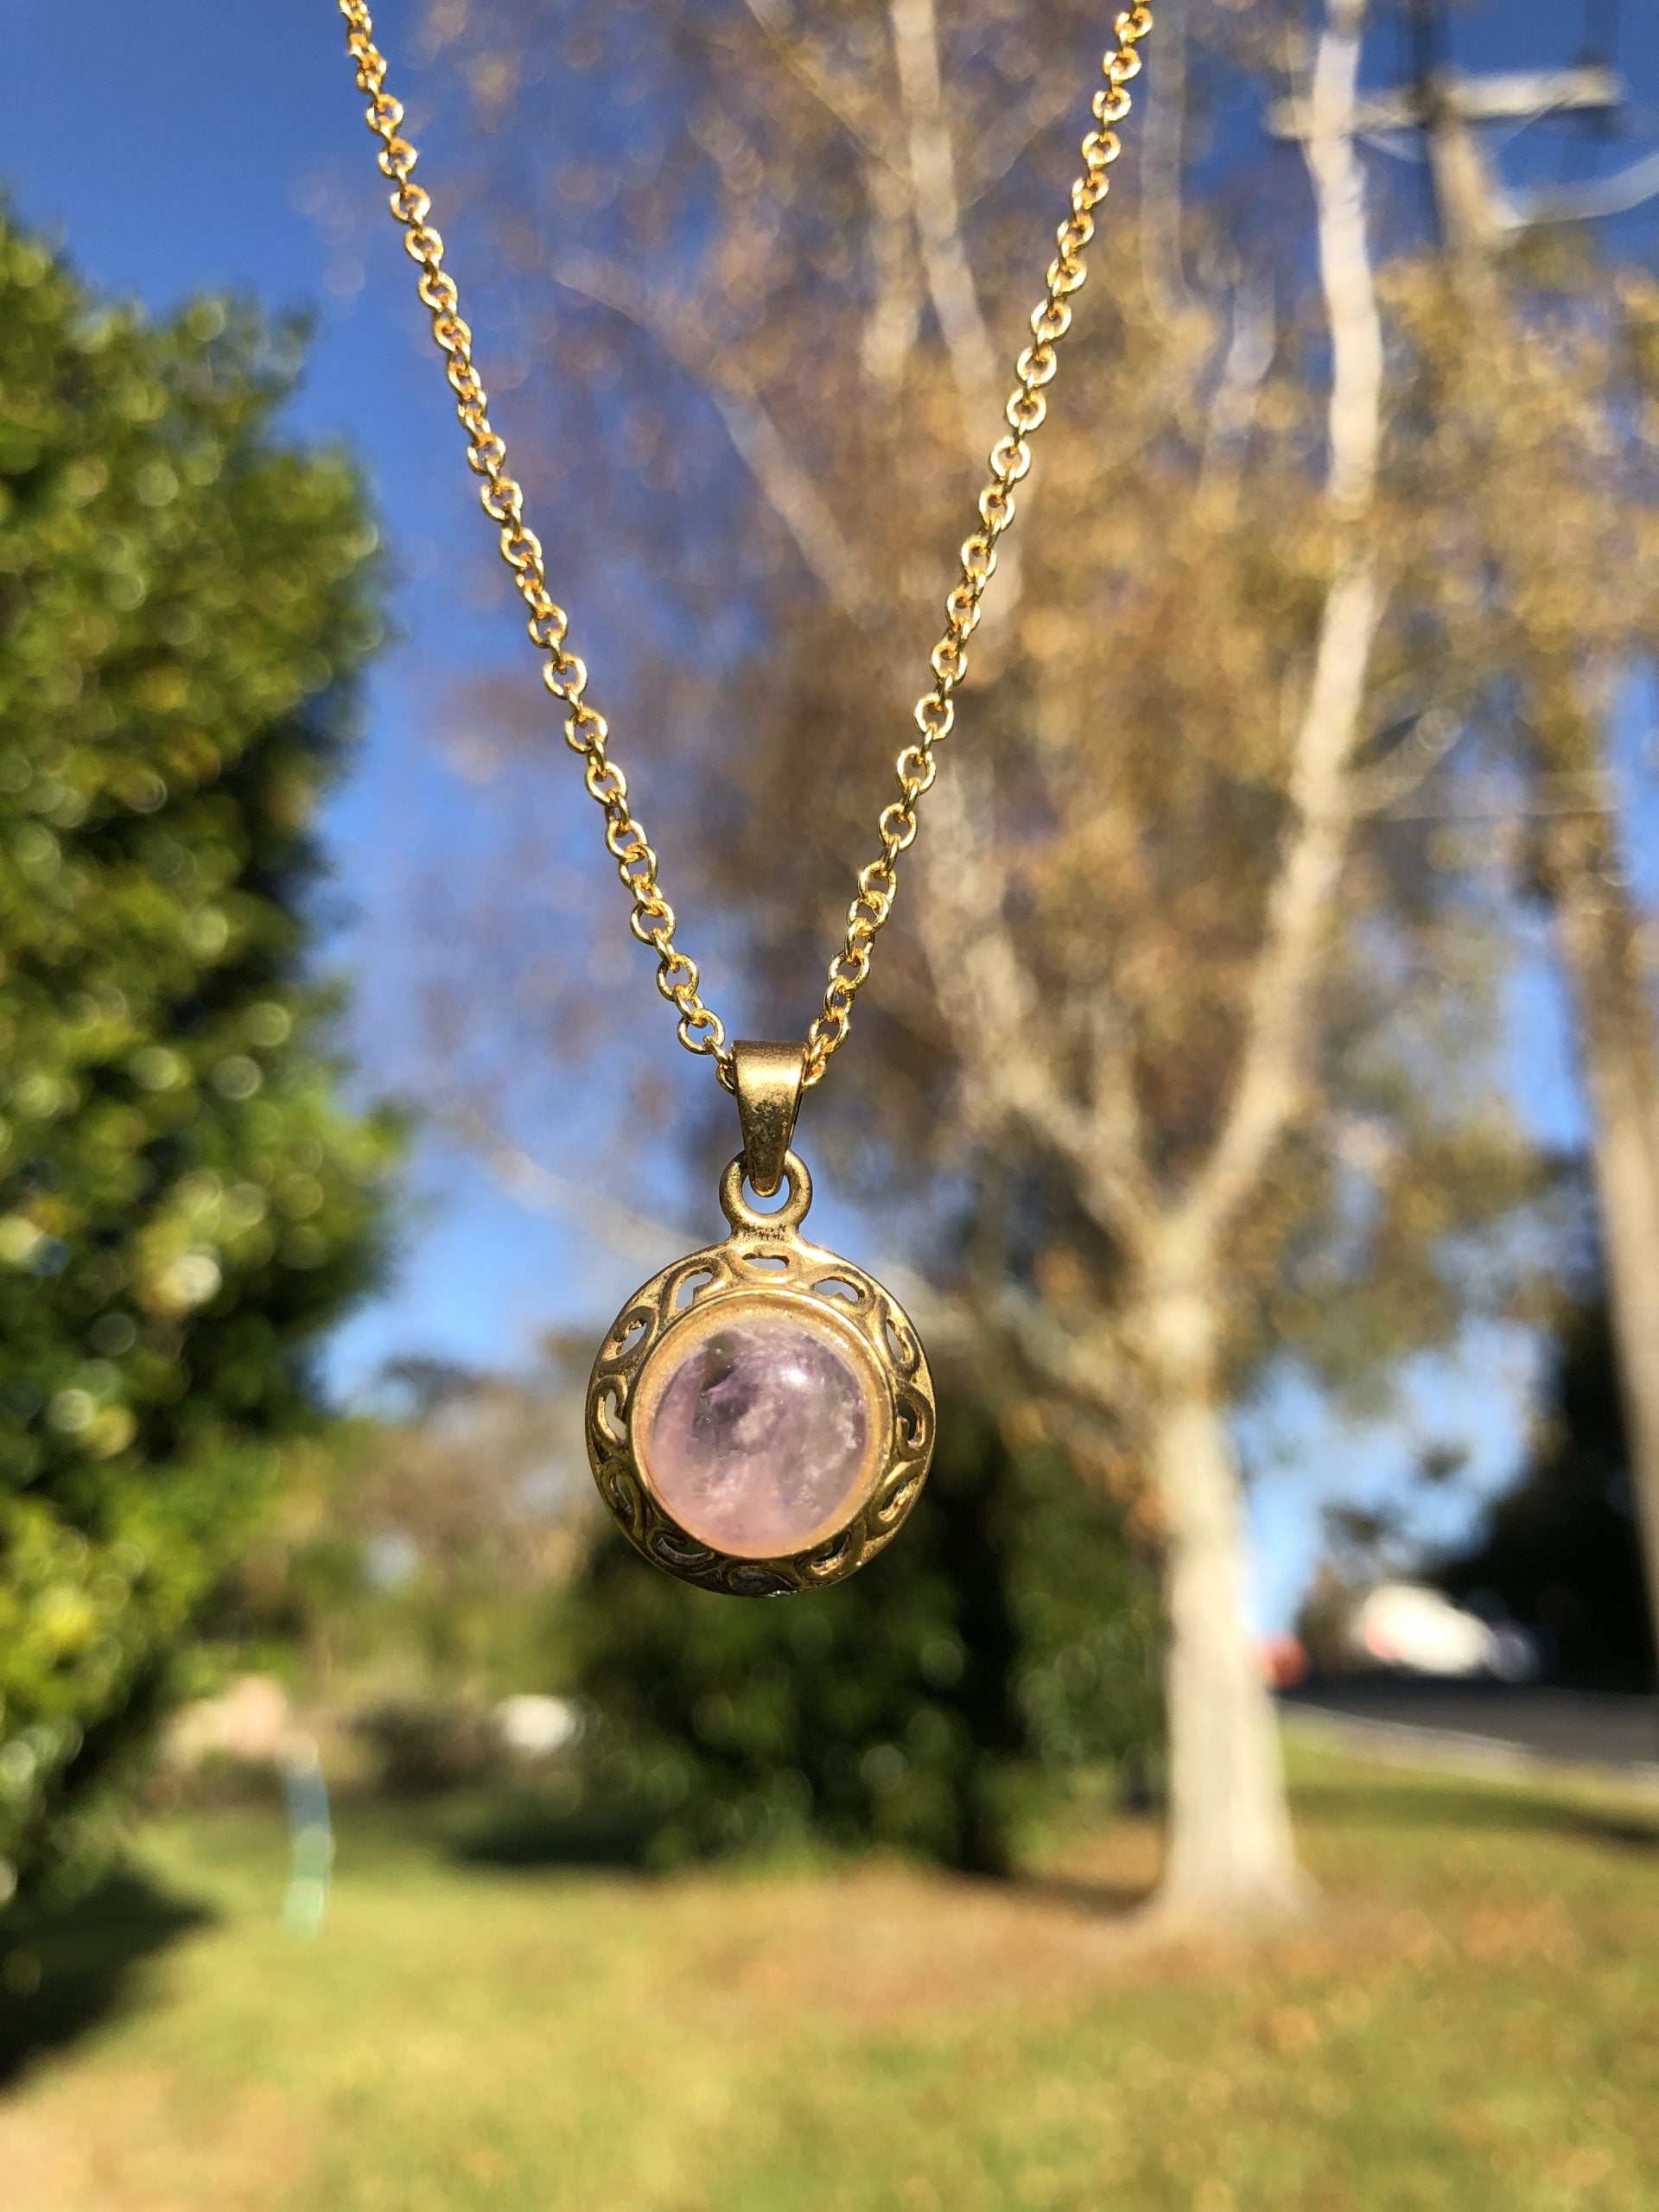 Necklace with natural Amethyst, delicate purple, hand cut to a 10mm round cabochon and set in a gold plated setting with 19 inch chain, in trees